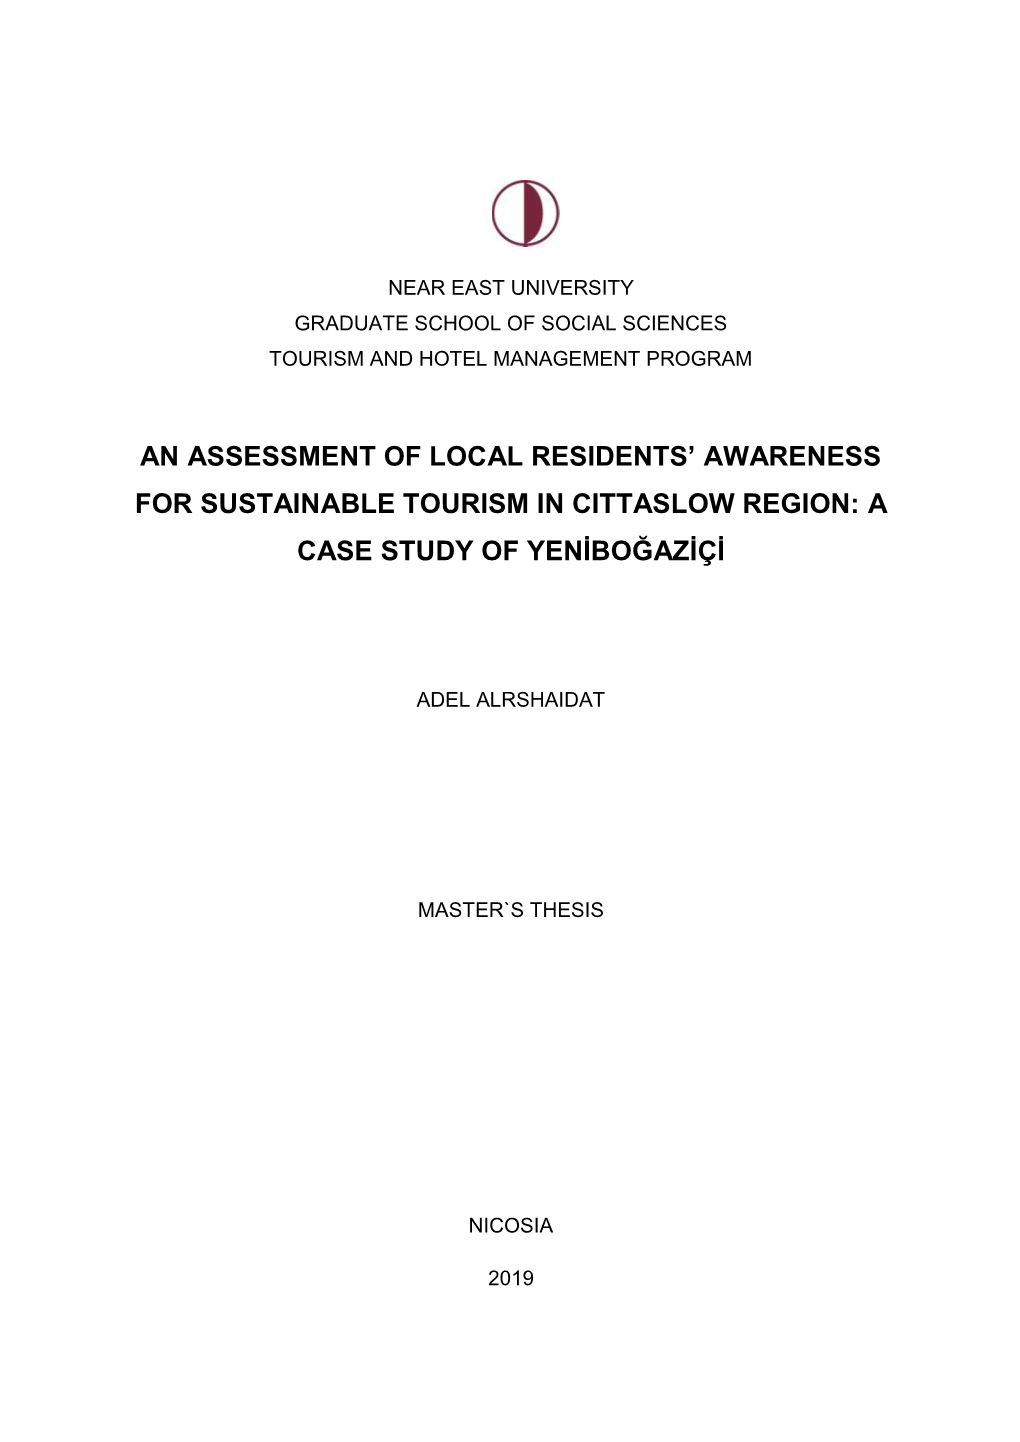 An Assessment of Local Residents' Awareness For